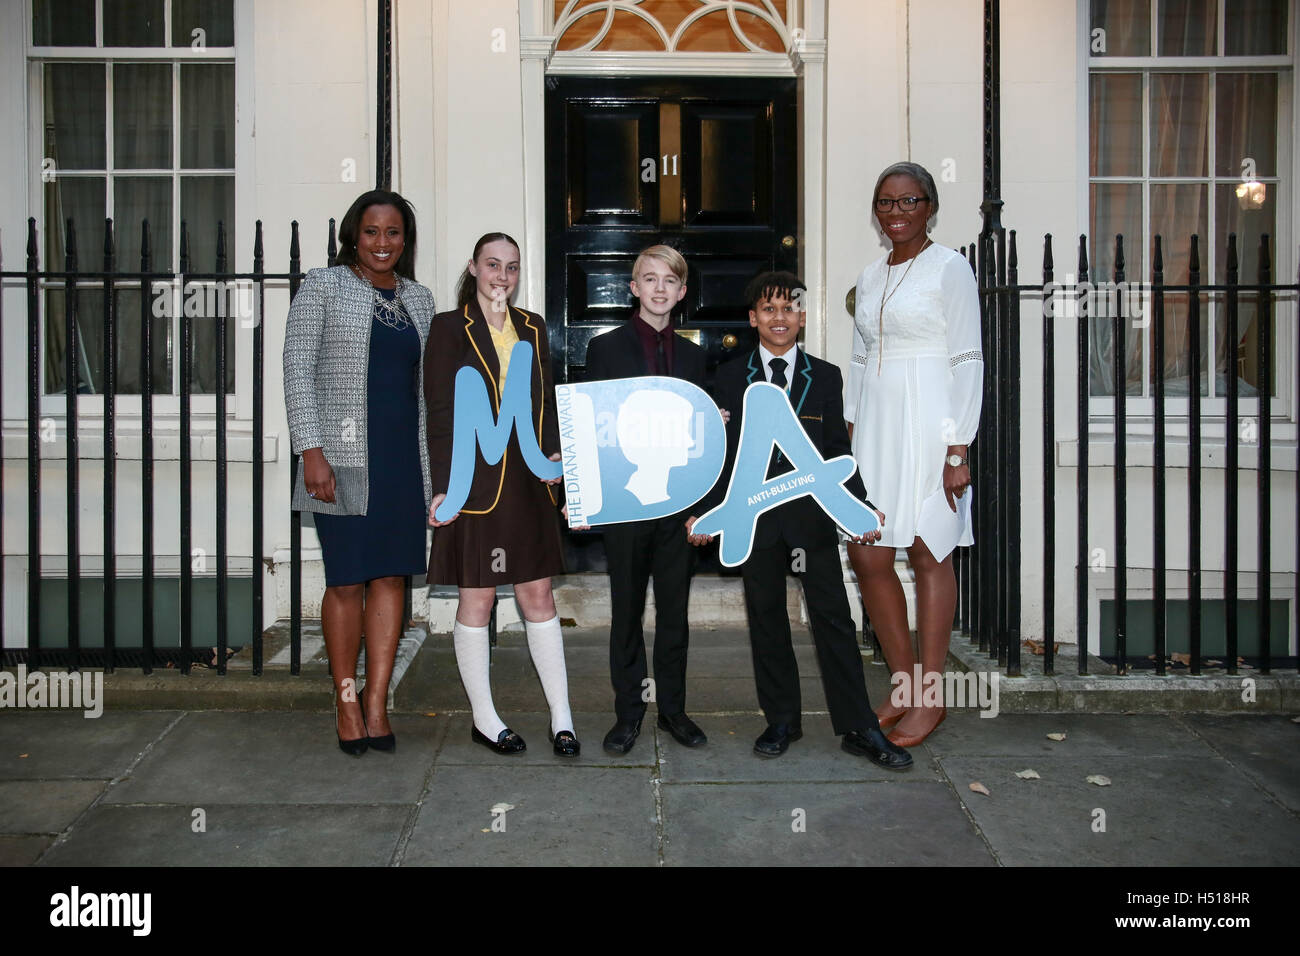 London, UK. 19th Oct, 2016. Charlene White (broadcaster, left to right), with Tara Whelan, Ryan Wiggins and Junior Frood (winners of the Diana Award) and Tessy Ojo (CEO of the Diana Award) posing for photos outside 11 Downing Street to celebrate seventeen years of the Diana Award. This award, set up in memory of Princess Diana, today has the support of both her sons the Duke of Cambridge and Prince Harry. Photo date: Wednesday, October 19, 2016. Credit:  Roger Garfield/Alamy Live News Stock Photo